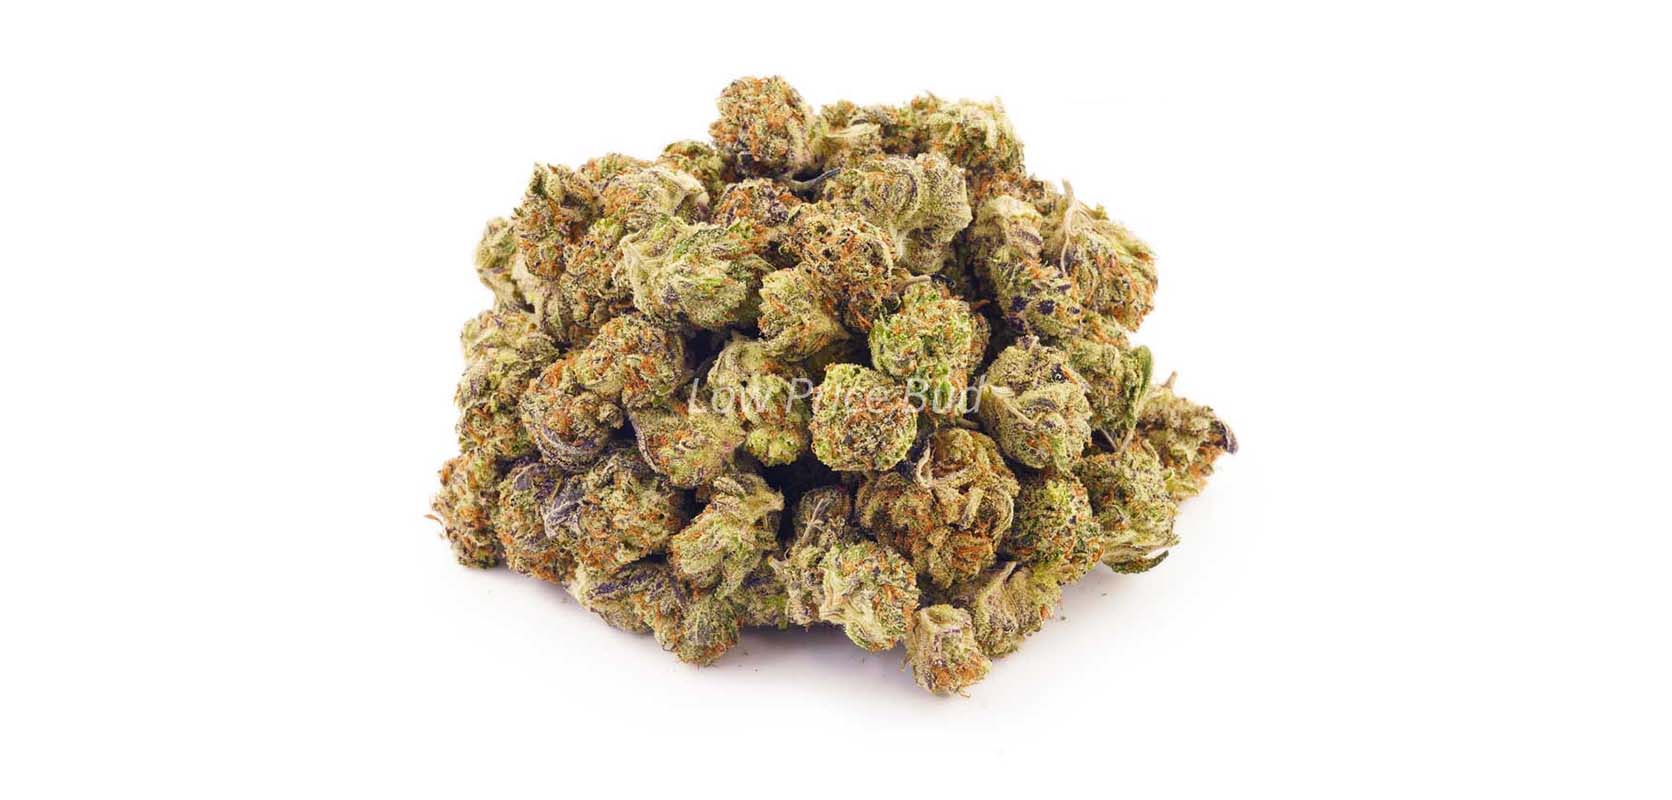 Haymaker weed online Canada from Low Price Bud weed dispensary. Buy dispensary weed, BC cannabis, and BC bud online. 